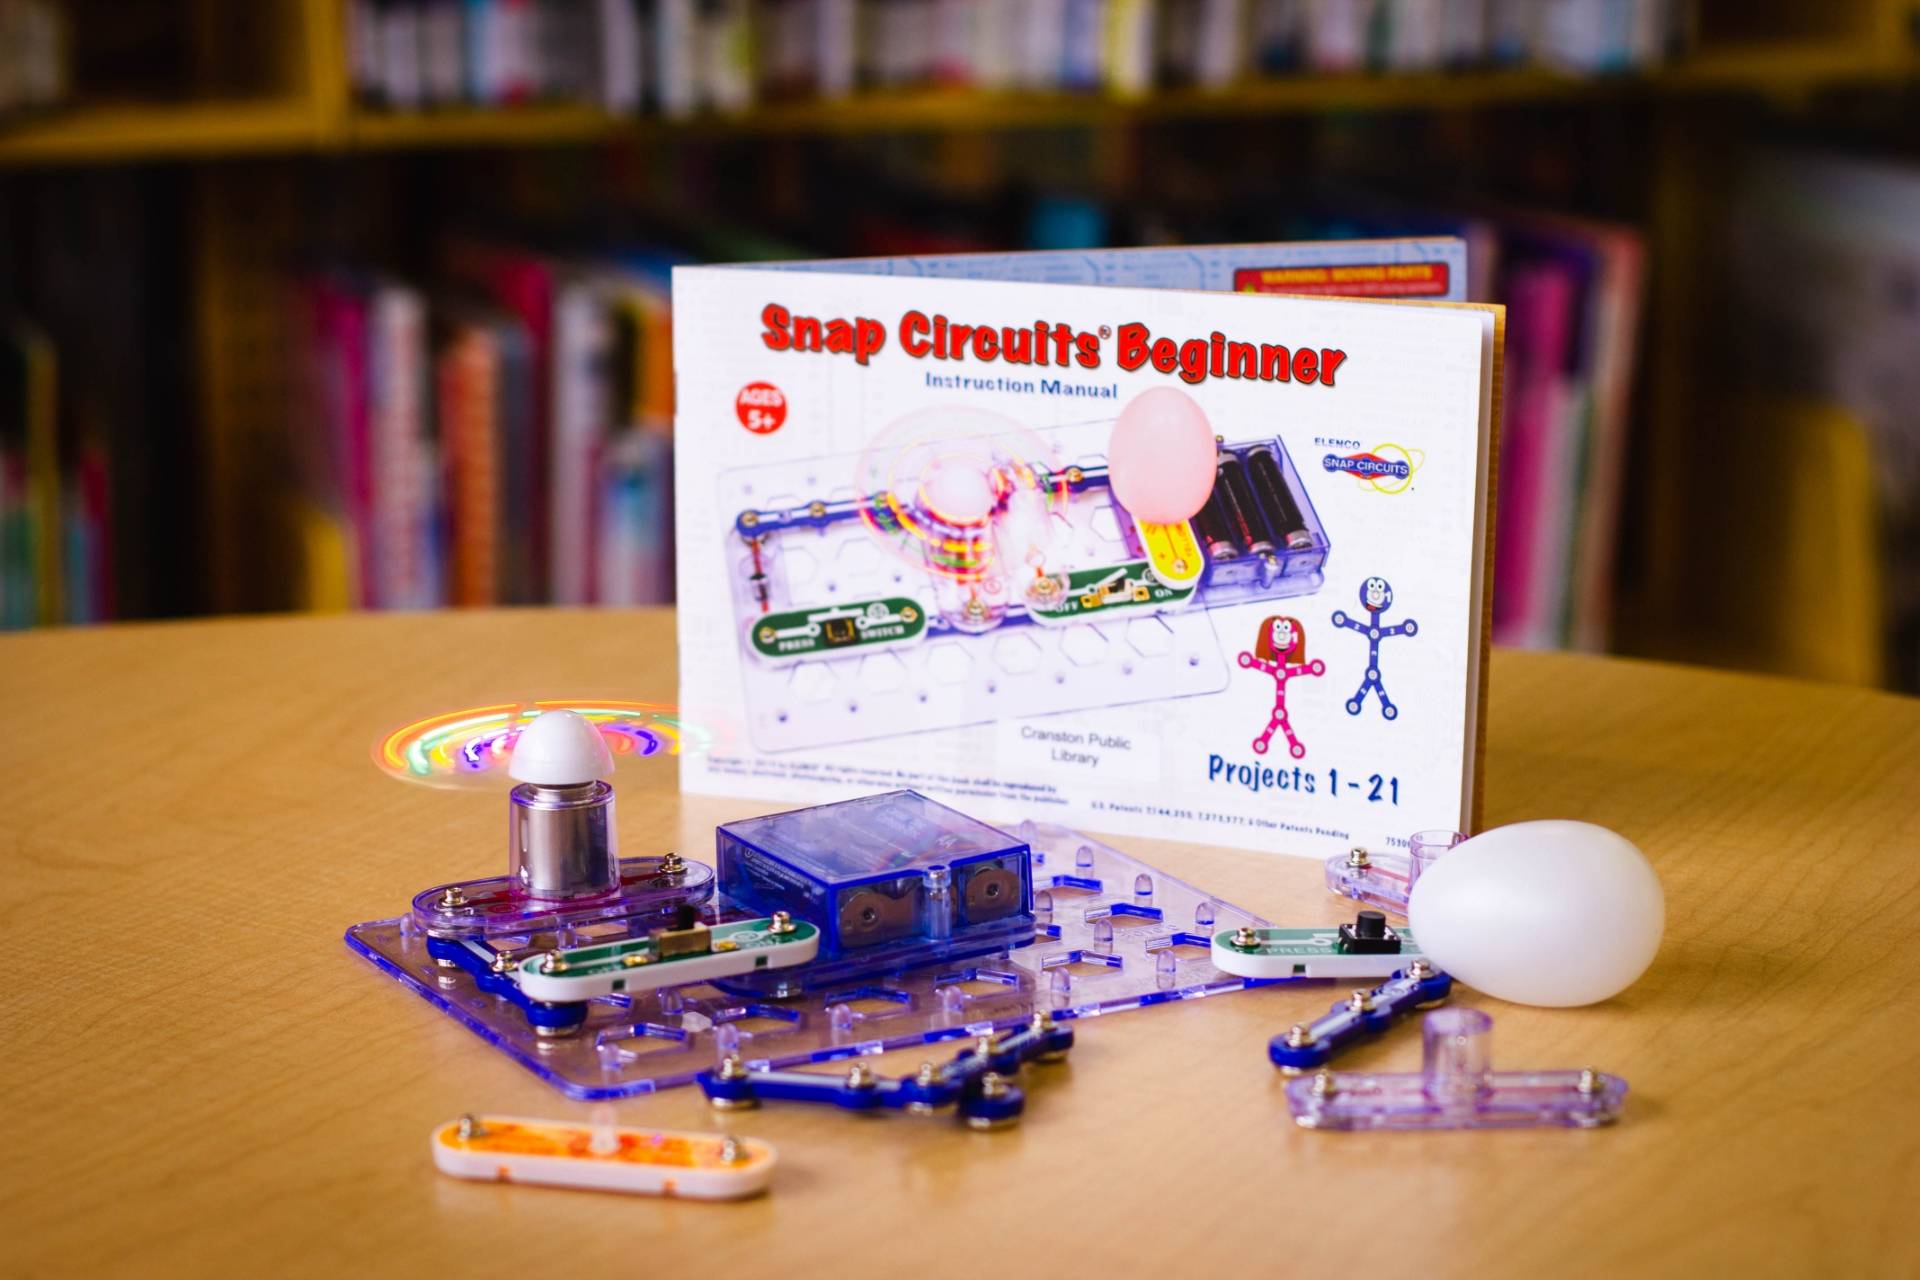 Snap Circuits Toolkit Contents